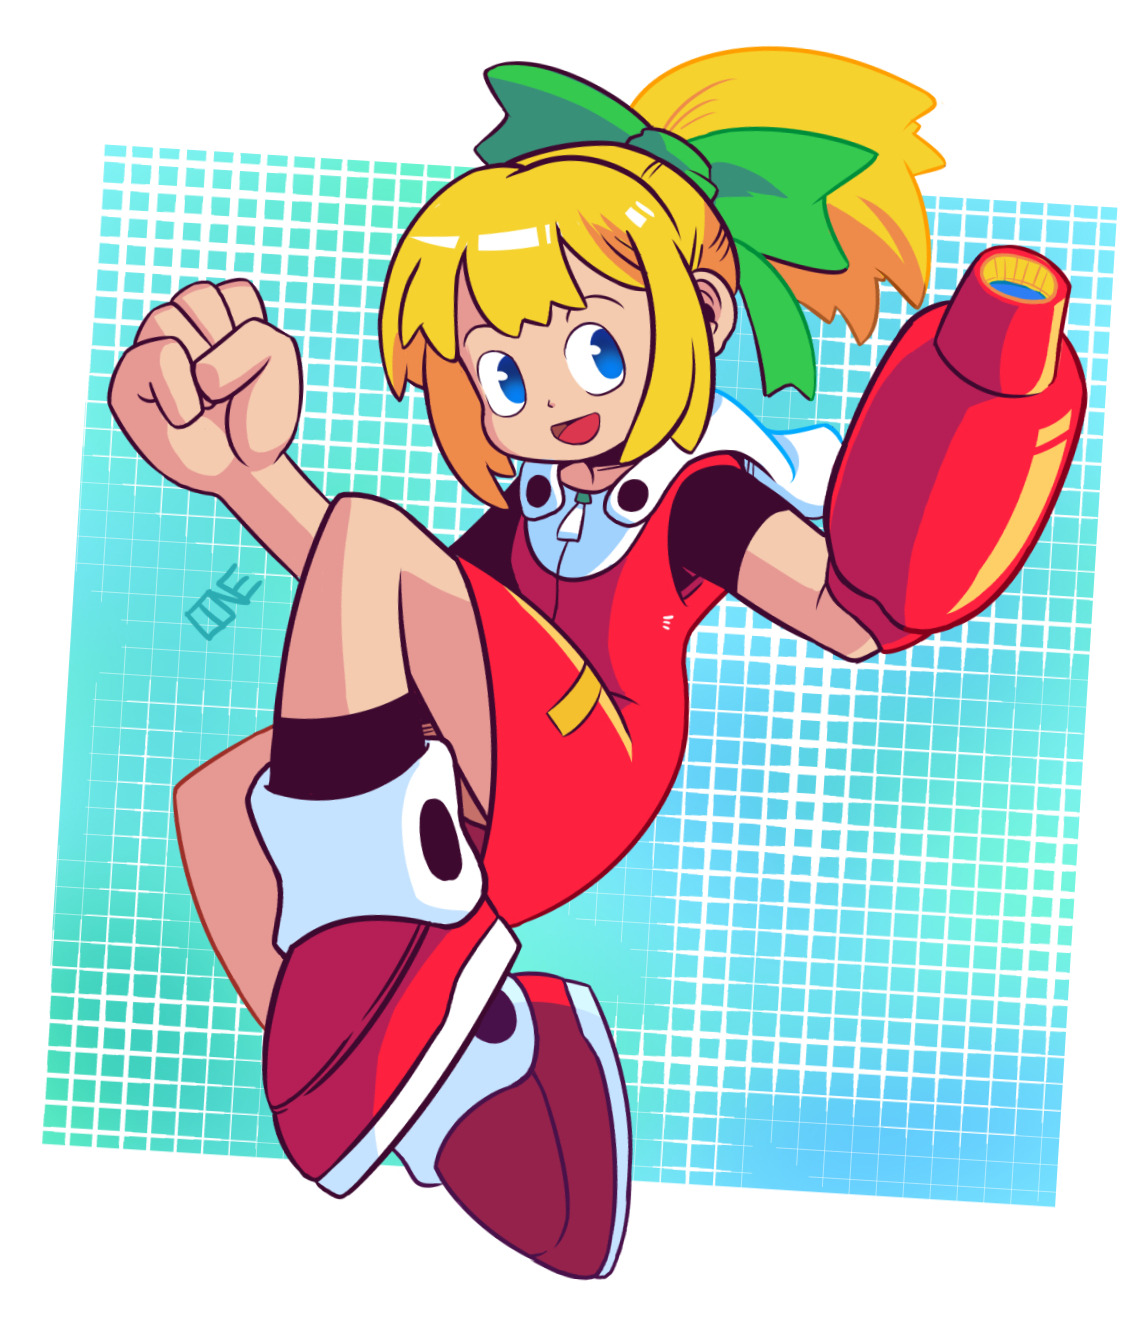 I put the Mega Man part of my brain to work today and drew a nice ol’ drawin’ of Roll. :T She’s over on twitter too, if you 